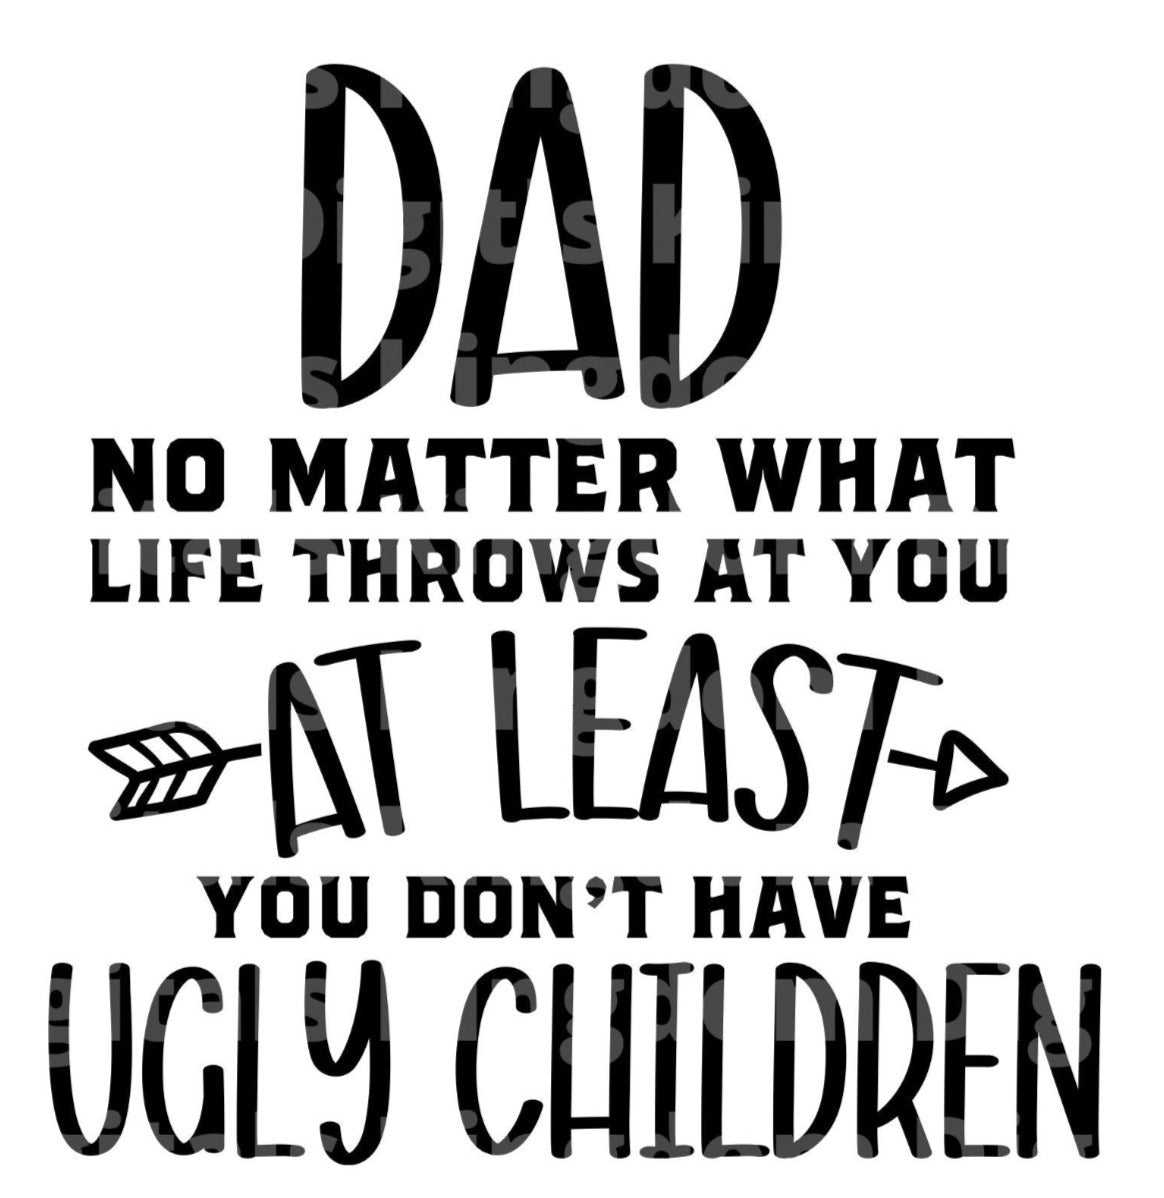 Dad No Matter What Life Throws at You, No Ugly Children SVG Cut File